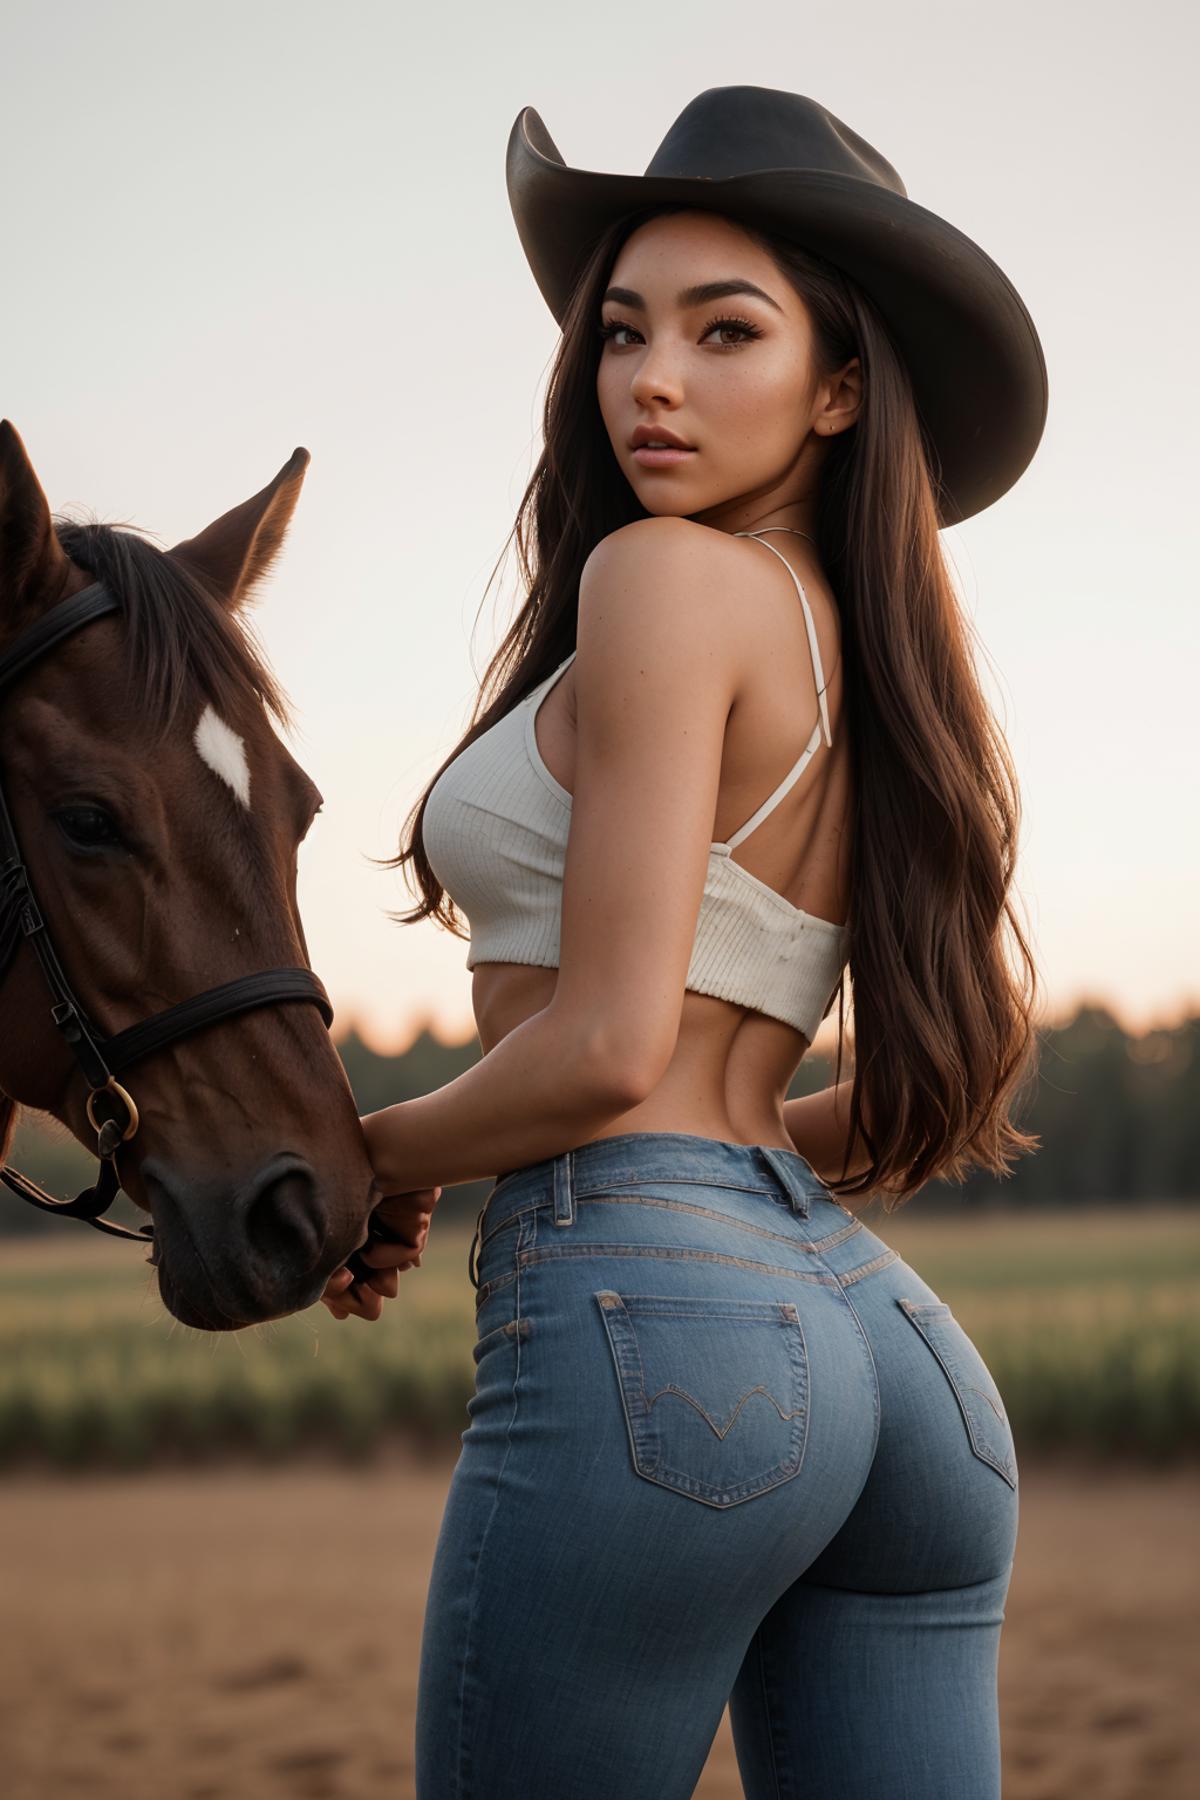 A woman posing in front of a horse wearing a cowboy hat and jeans.